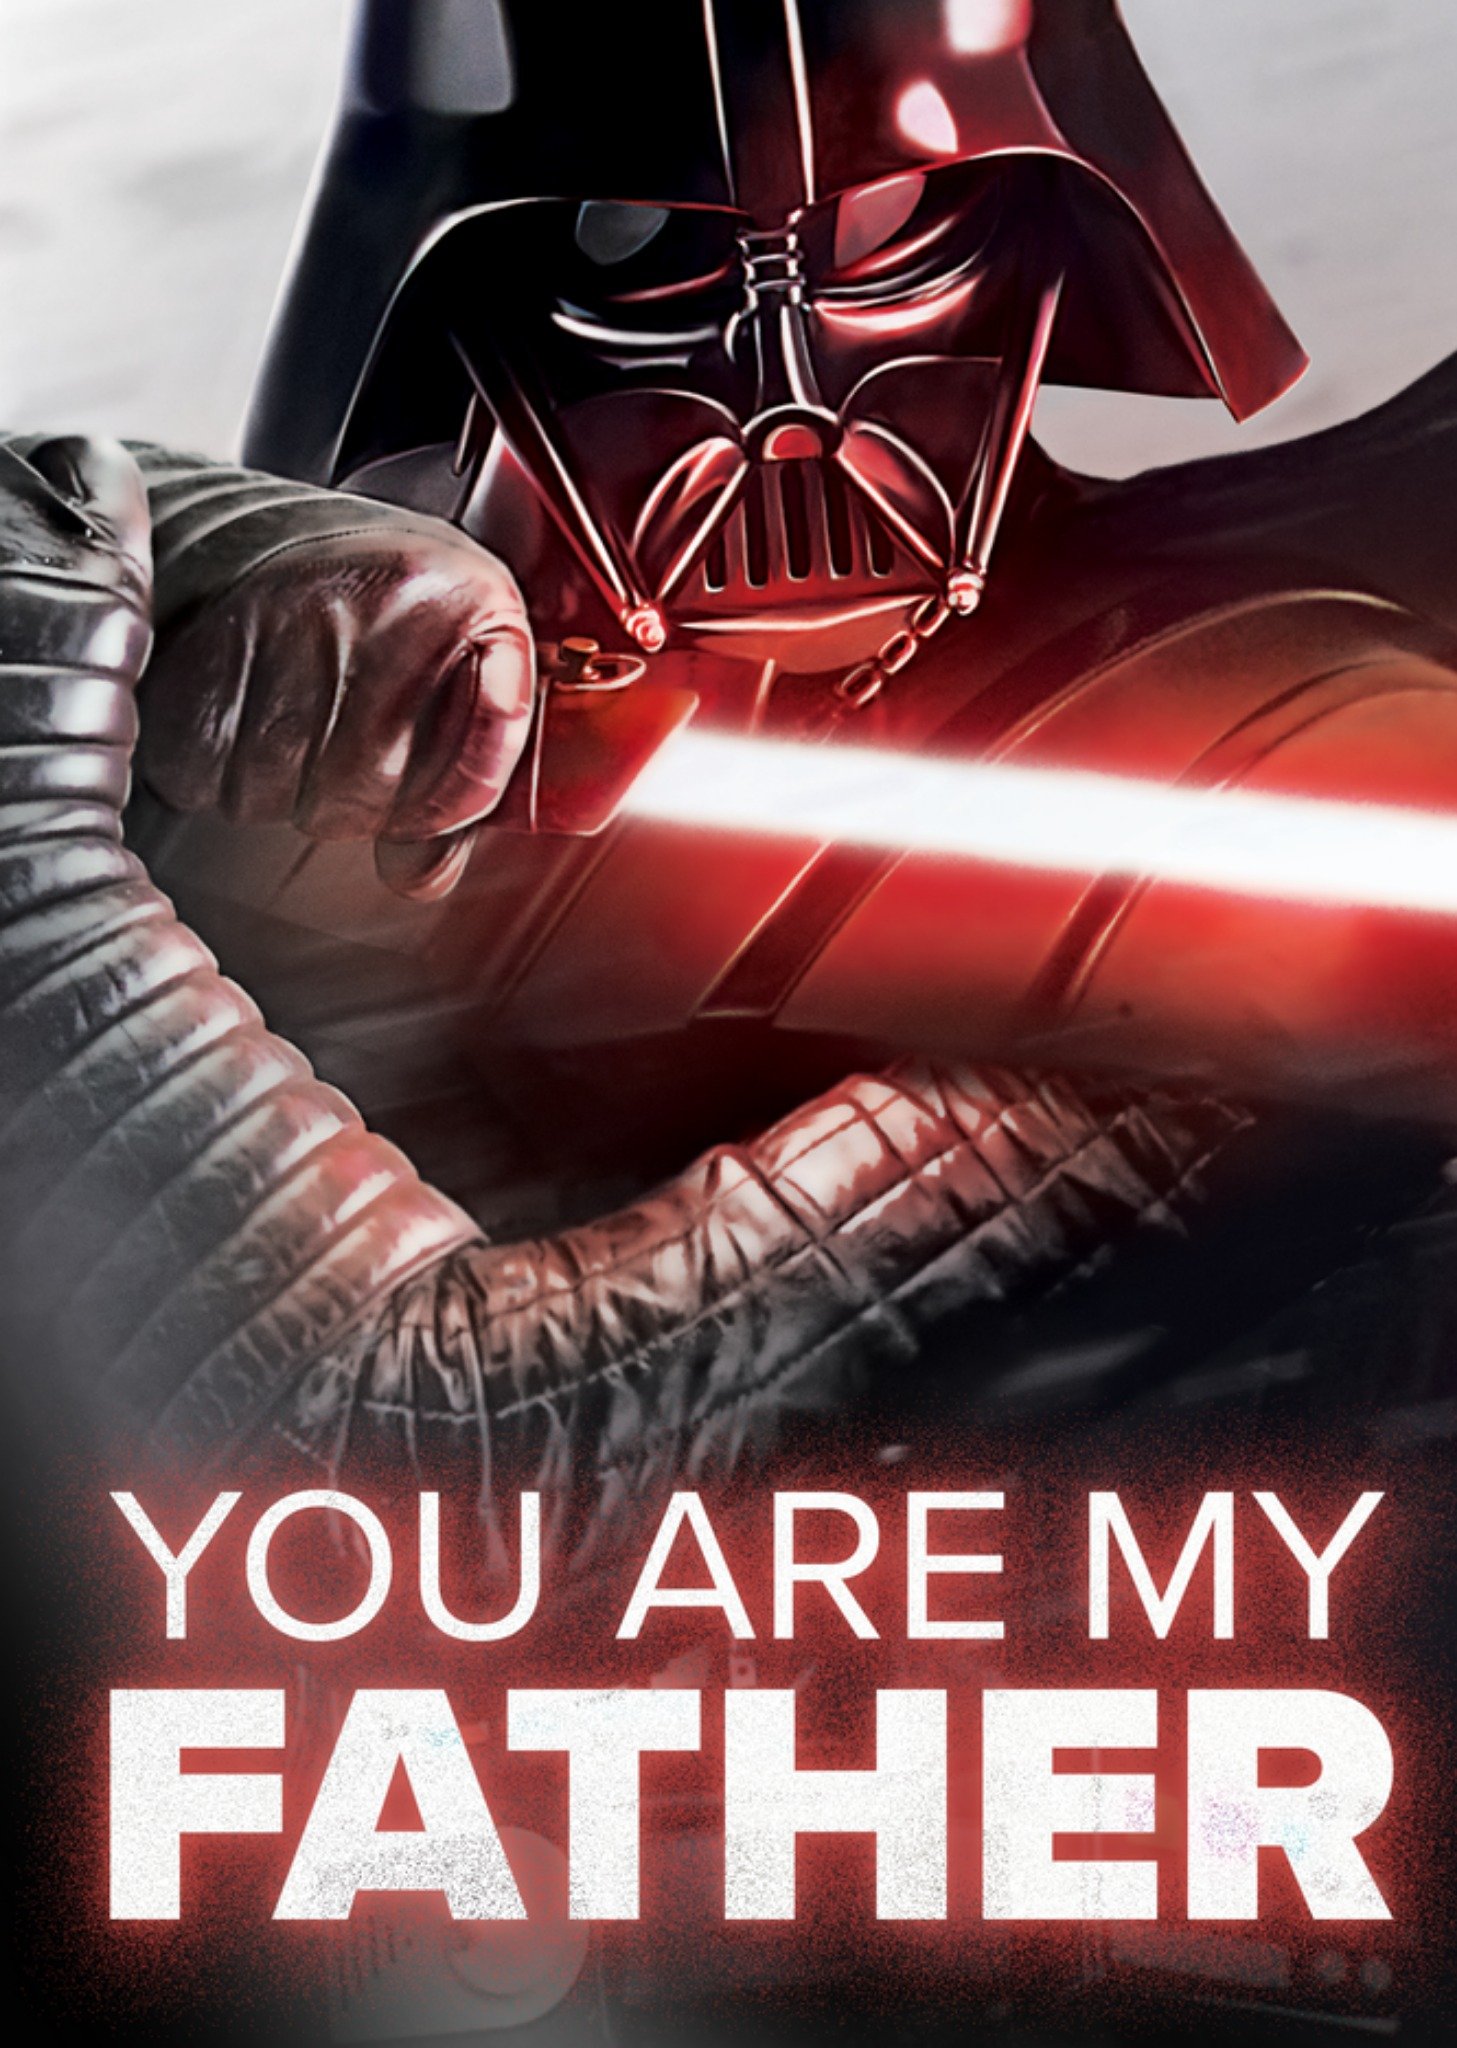 Star Wars - Vaderdagkaart - Darth Vader - You are my father